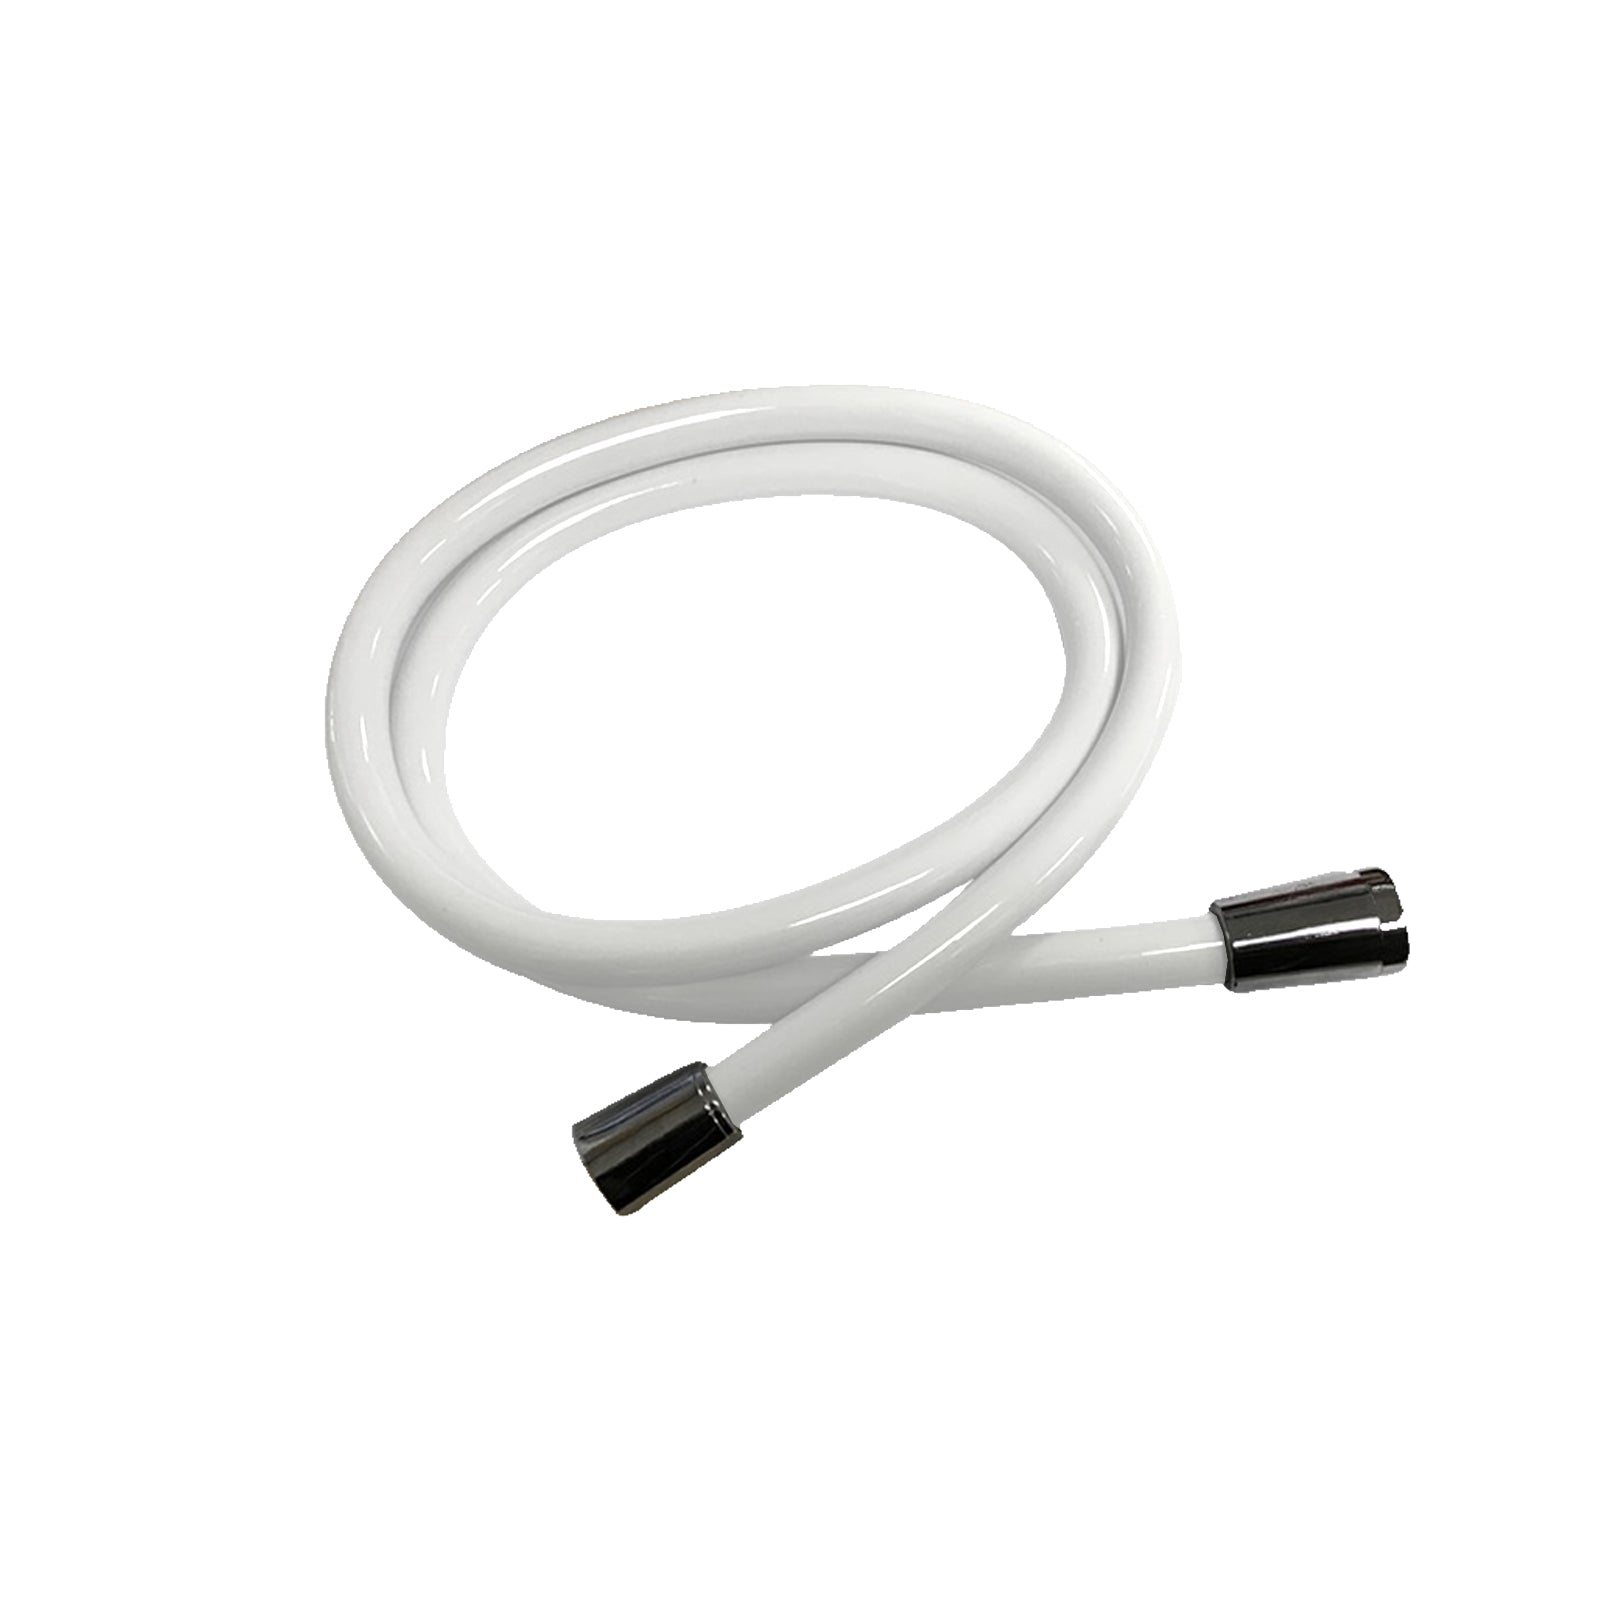 1.5m Smooth White PVC Flexible Shower Hose Replacement With Brass Connectors